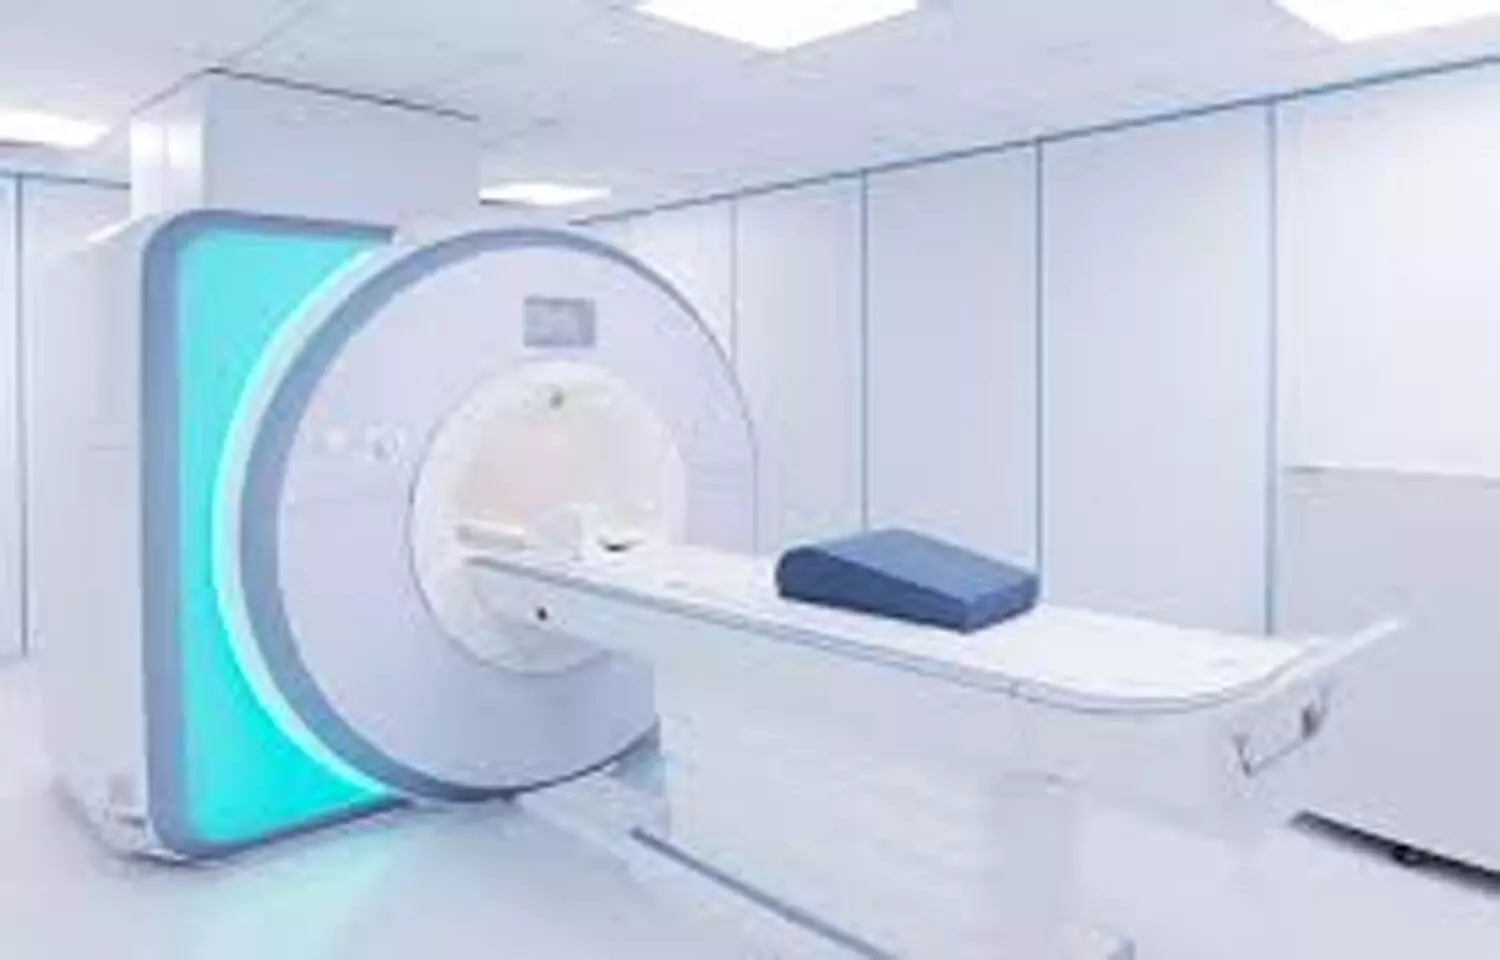 Whole-body MRI with artificial intelligence may help detect diabetes, finds study